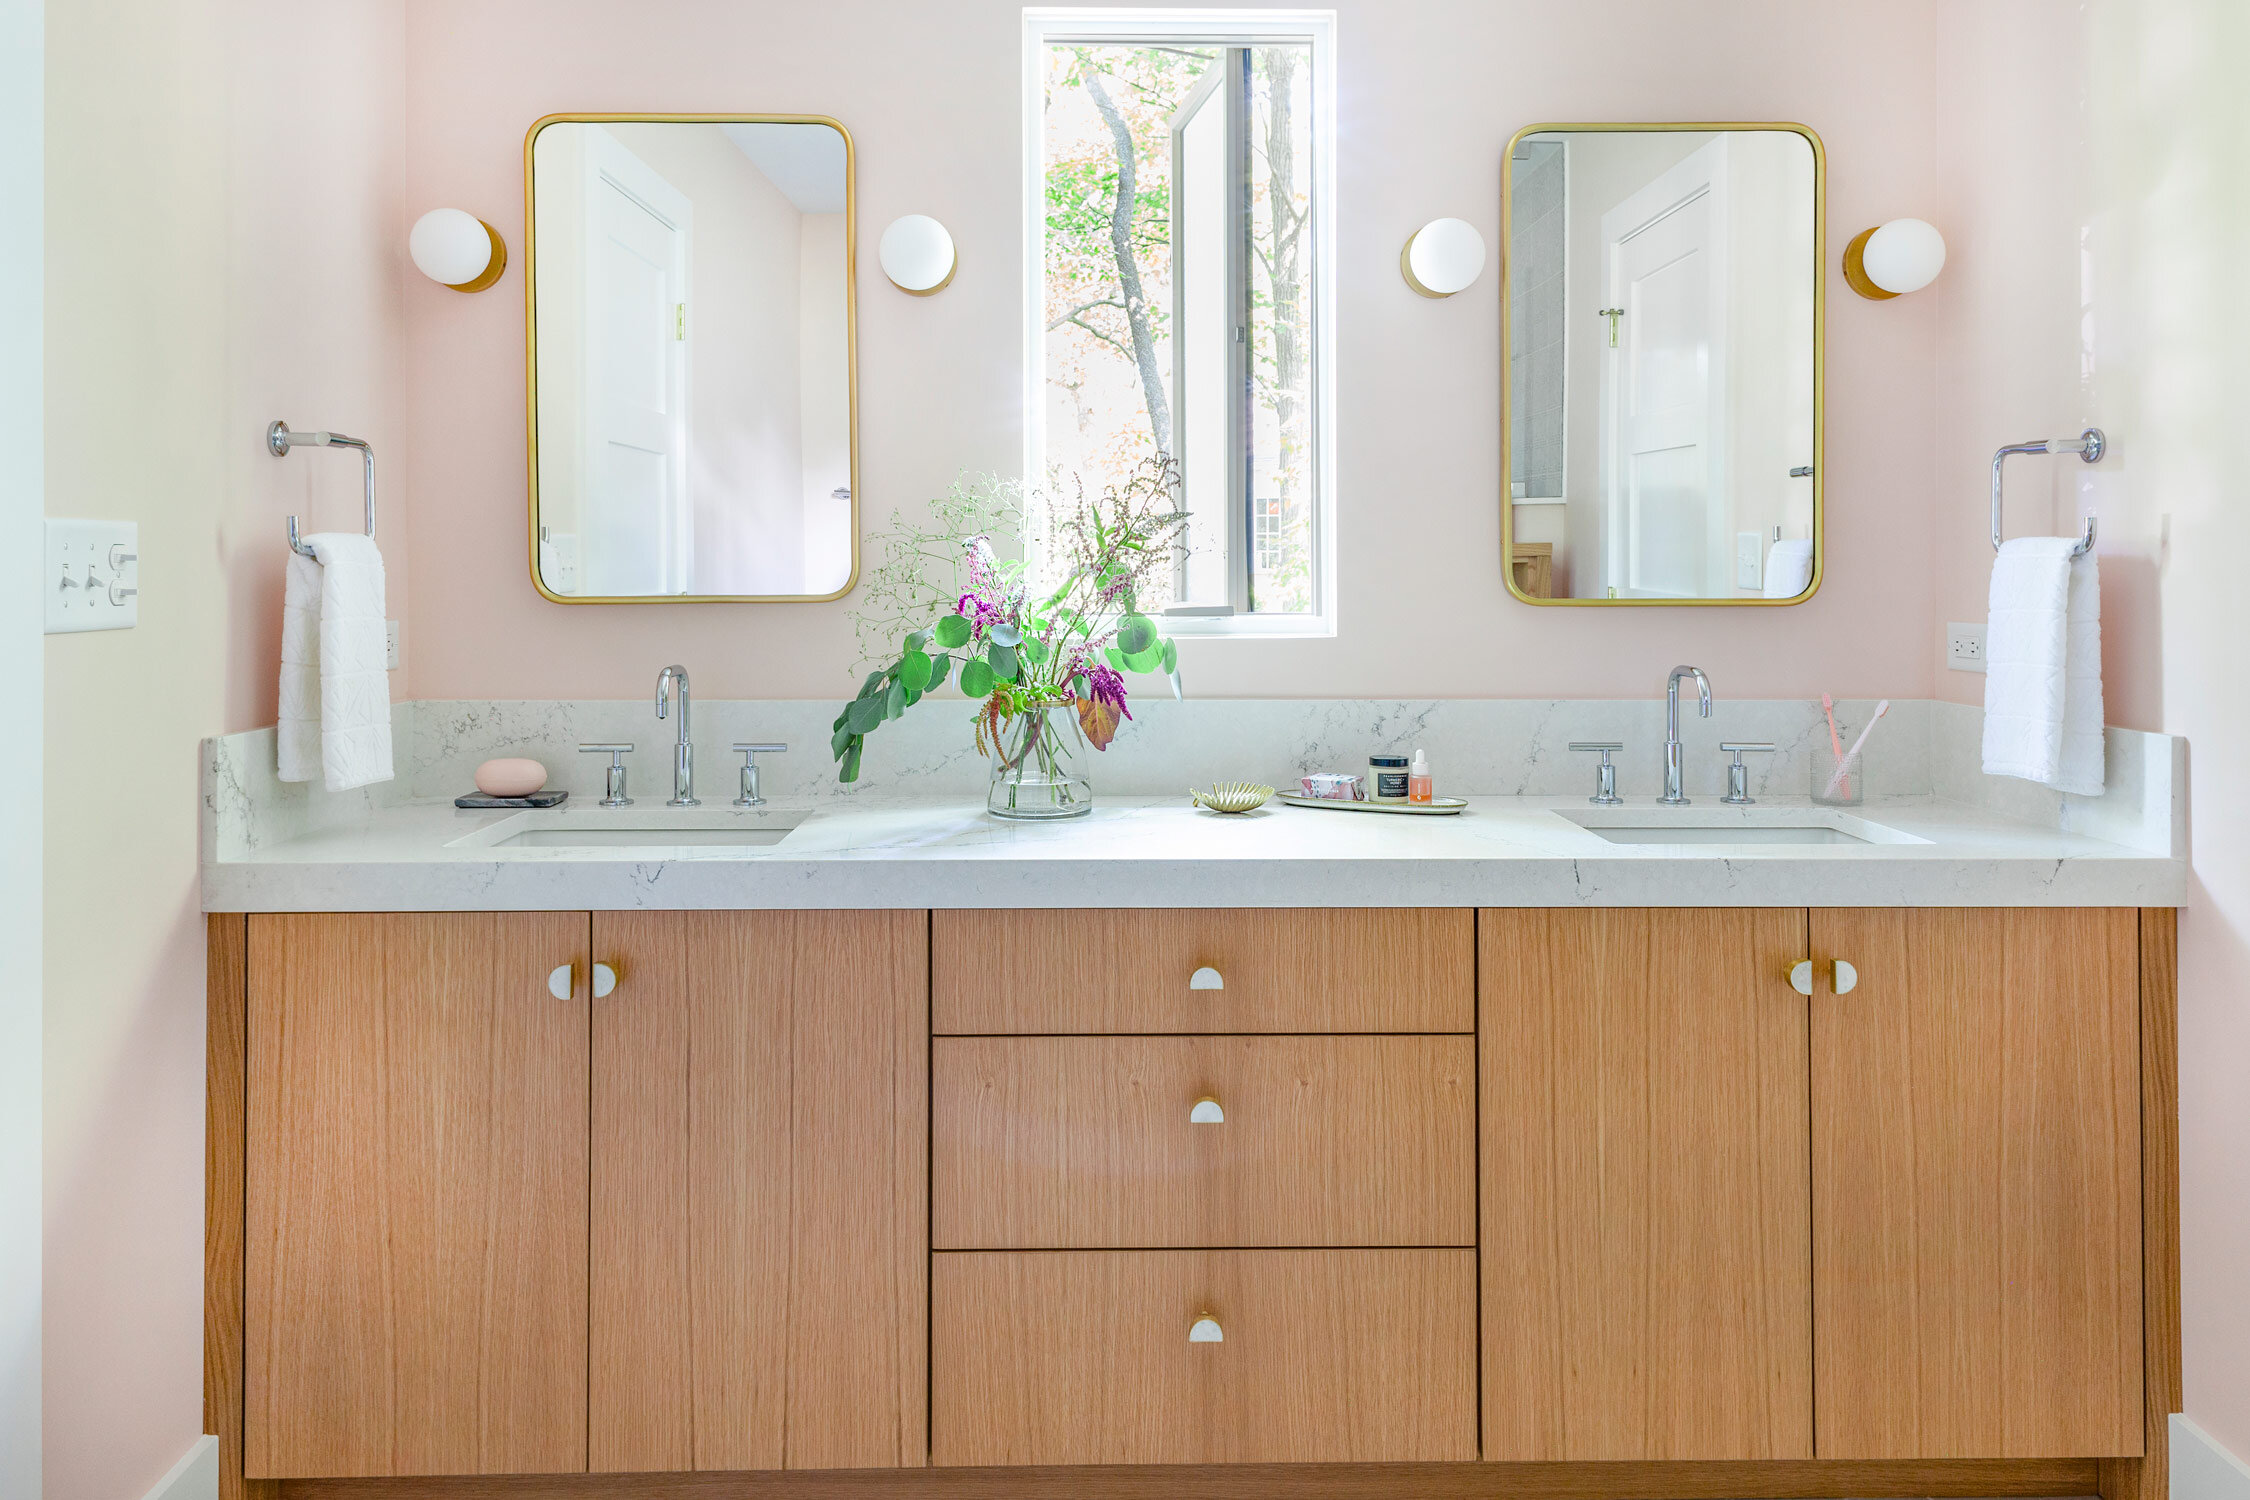 4 Improvement Ideas for Your Bathroom Remodel